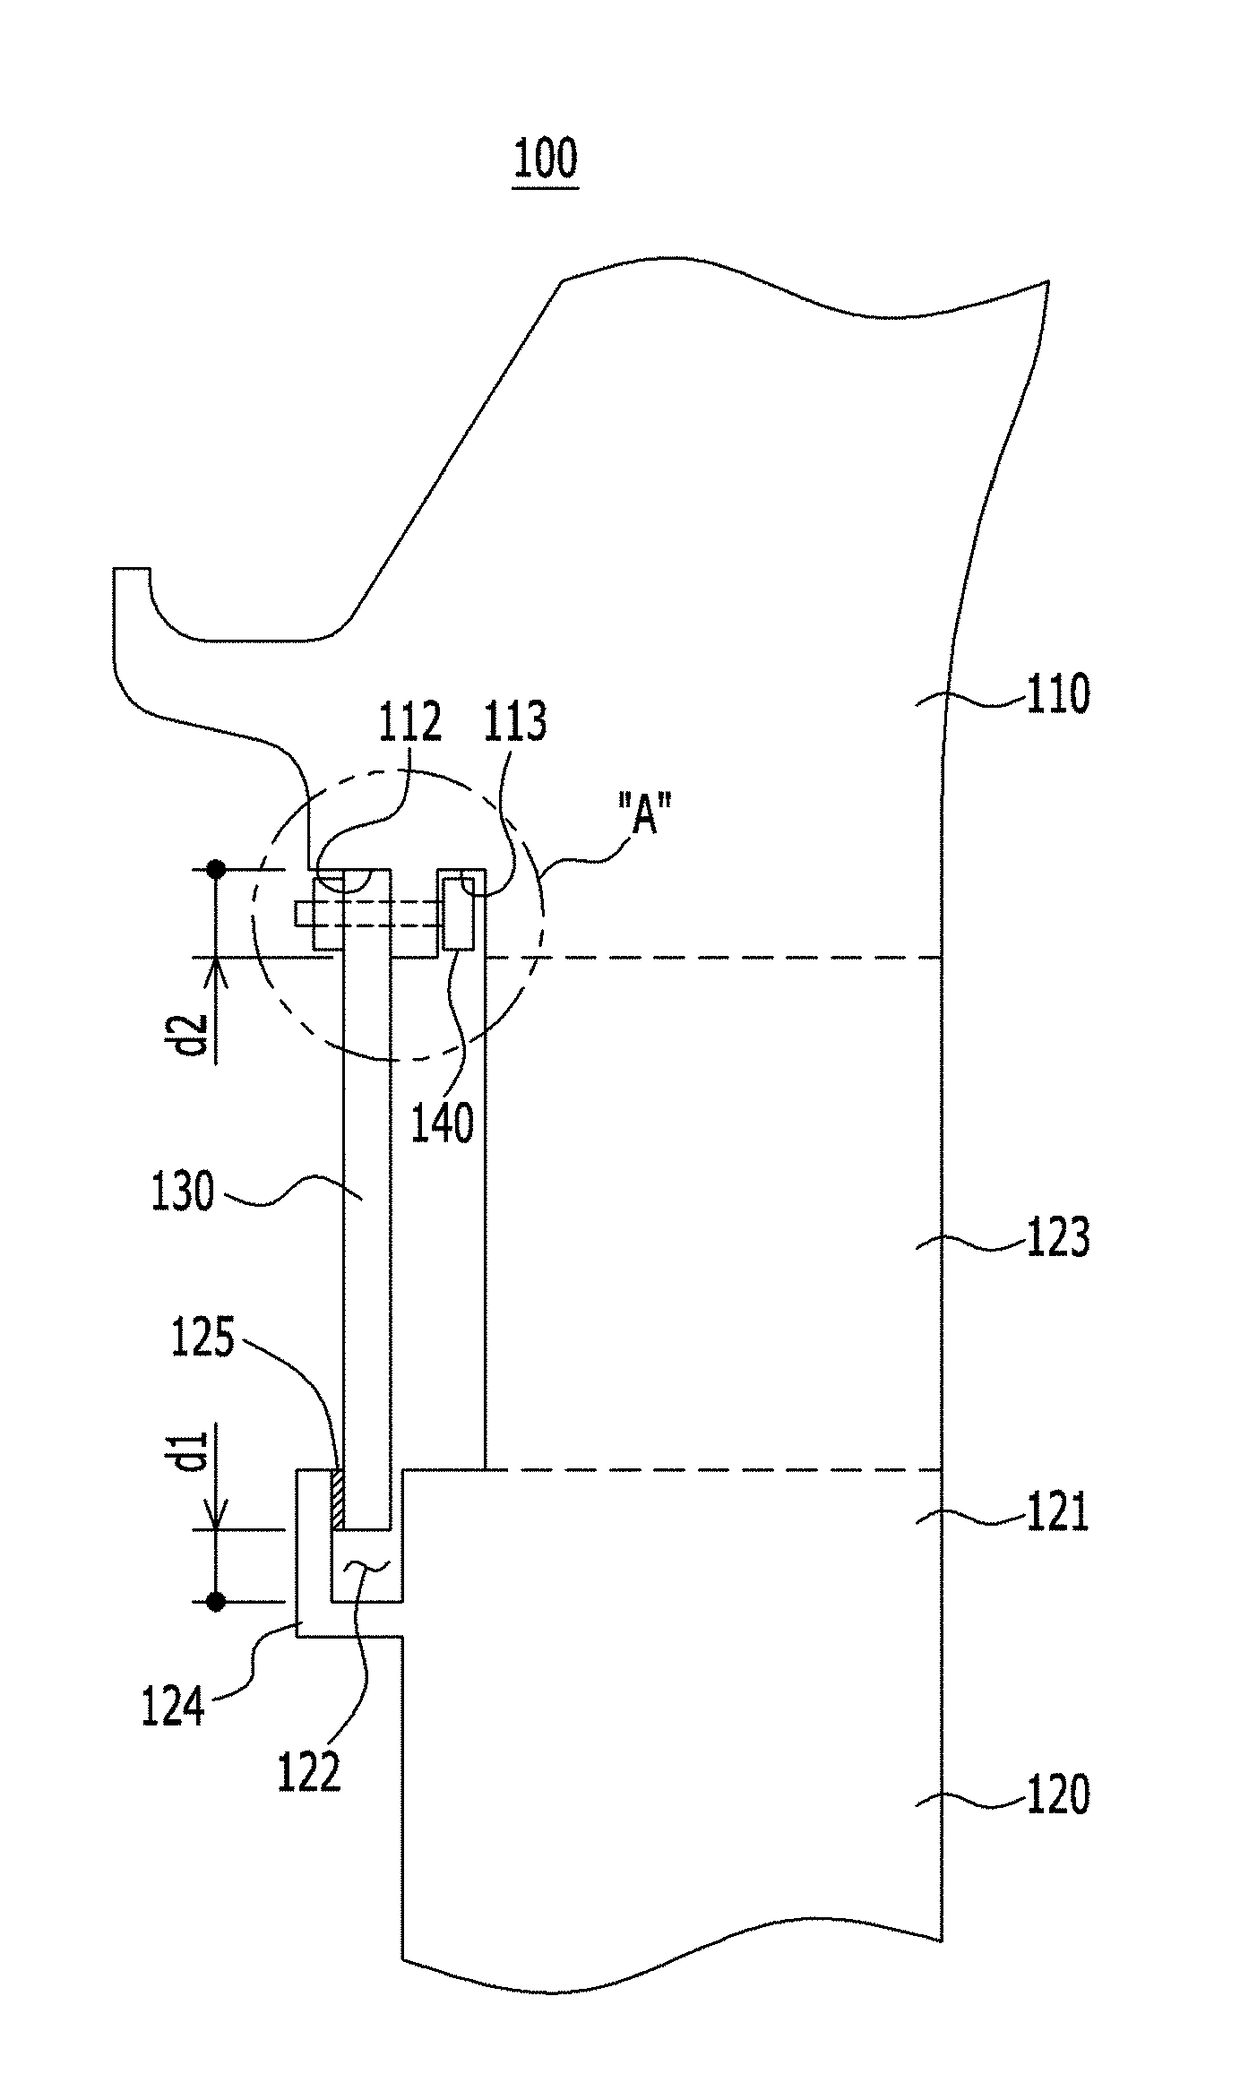 Gas turbine blade assembly having retainer assembling structure, and gas turbine having same